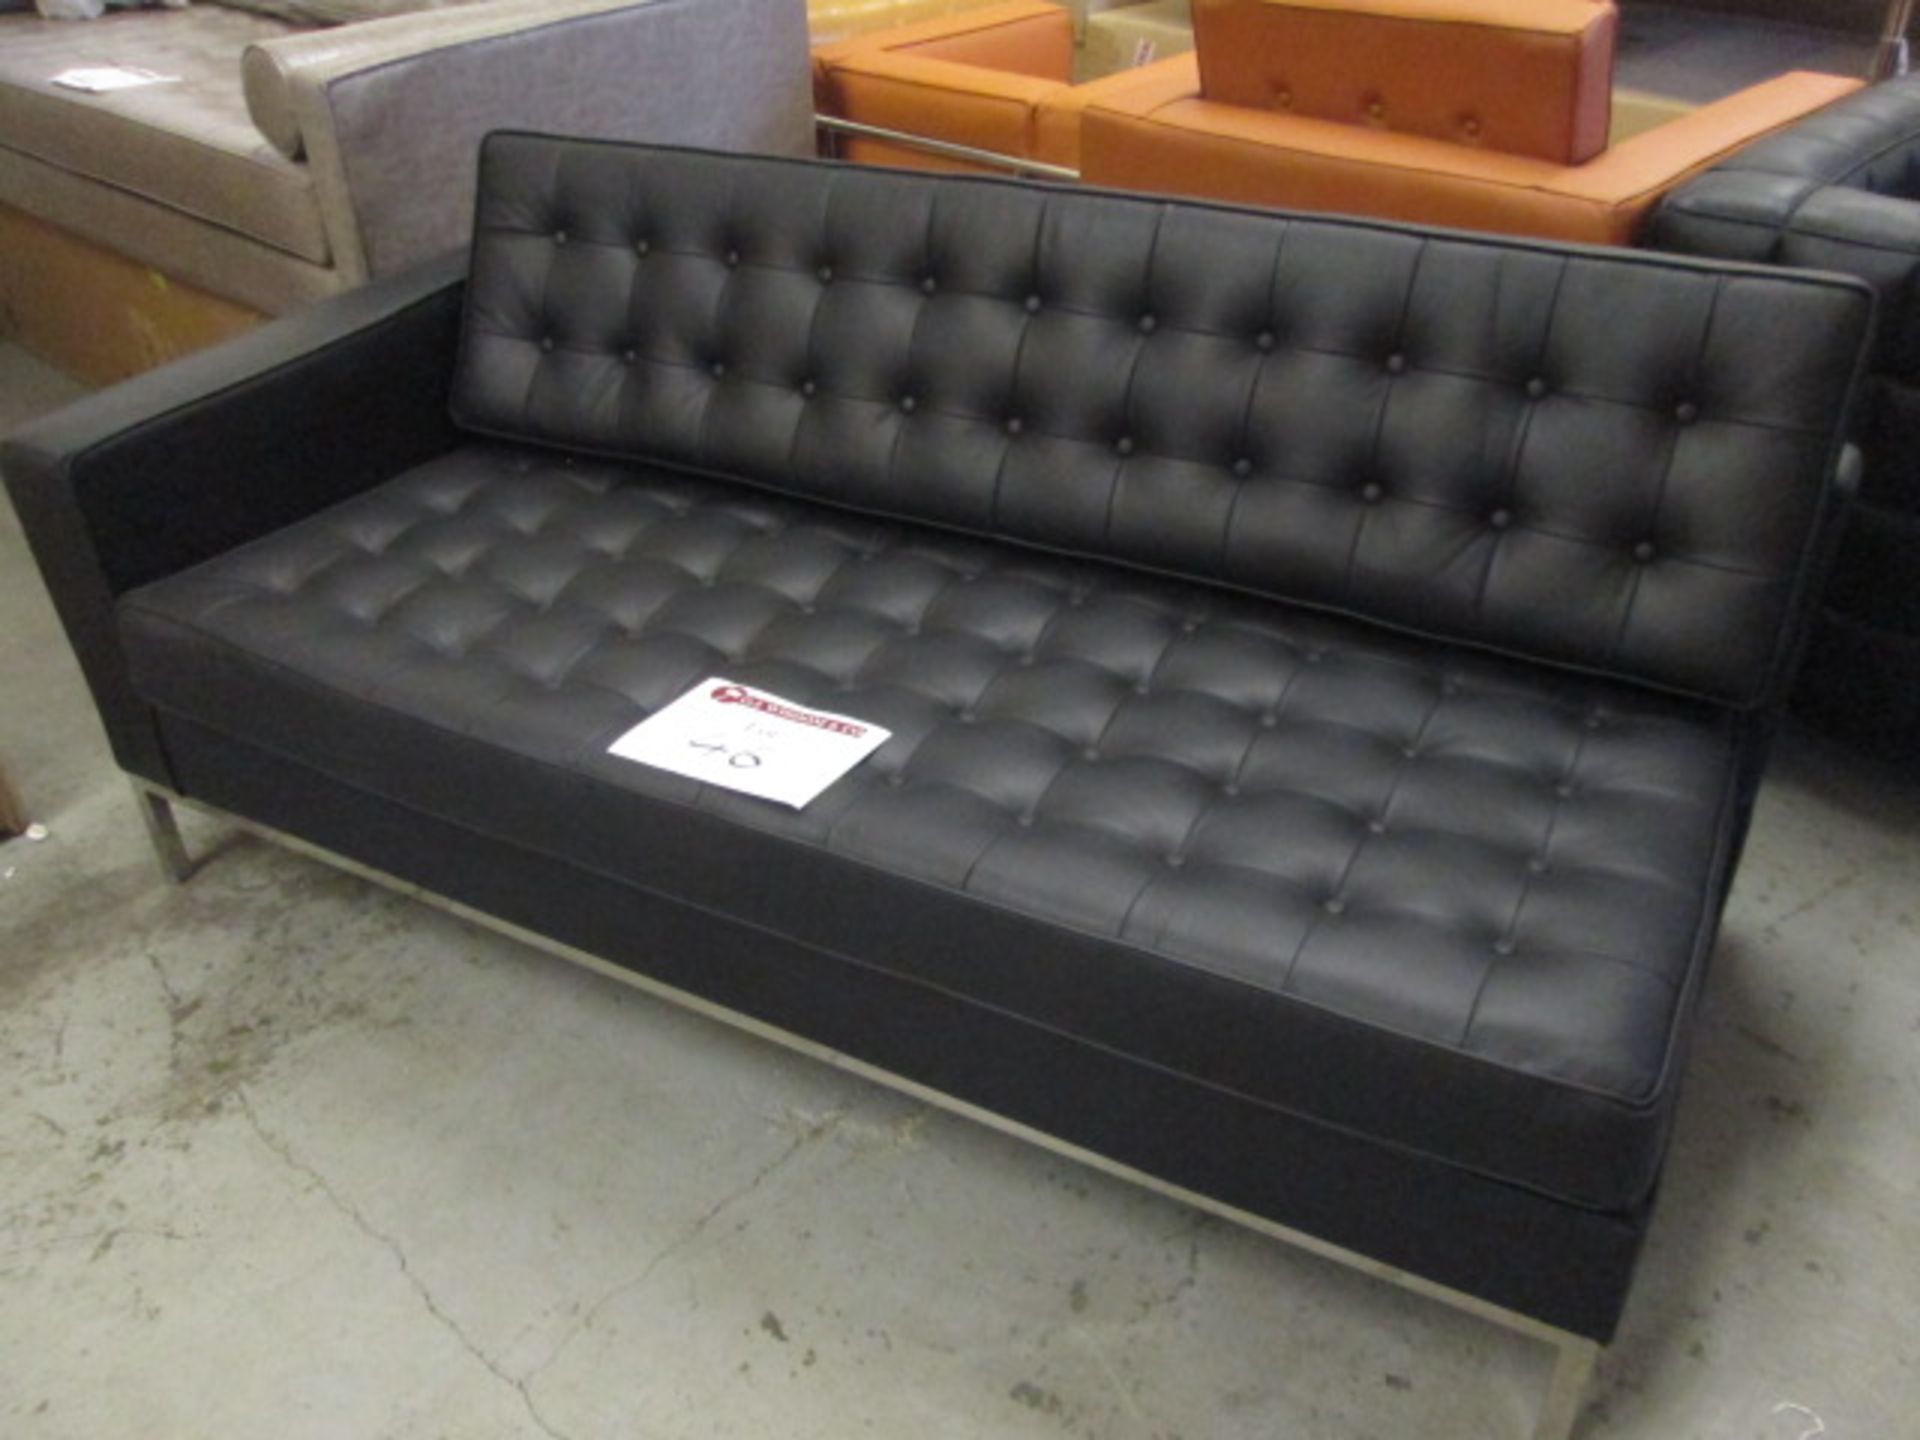 Ex-Display - Single Ended Black Leather Buttoned Sofa on Chrome Base. Size (H) 60cm x (W) 175cm x (